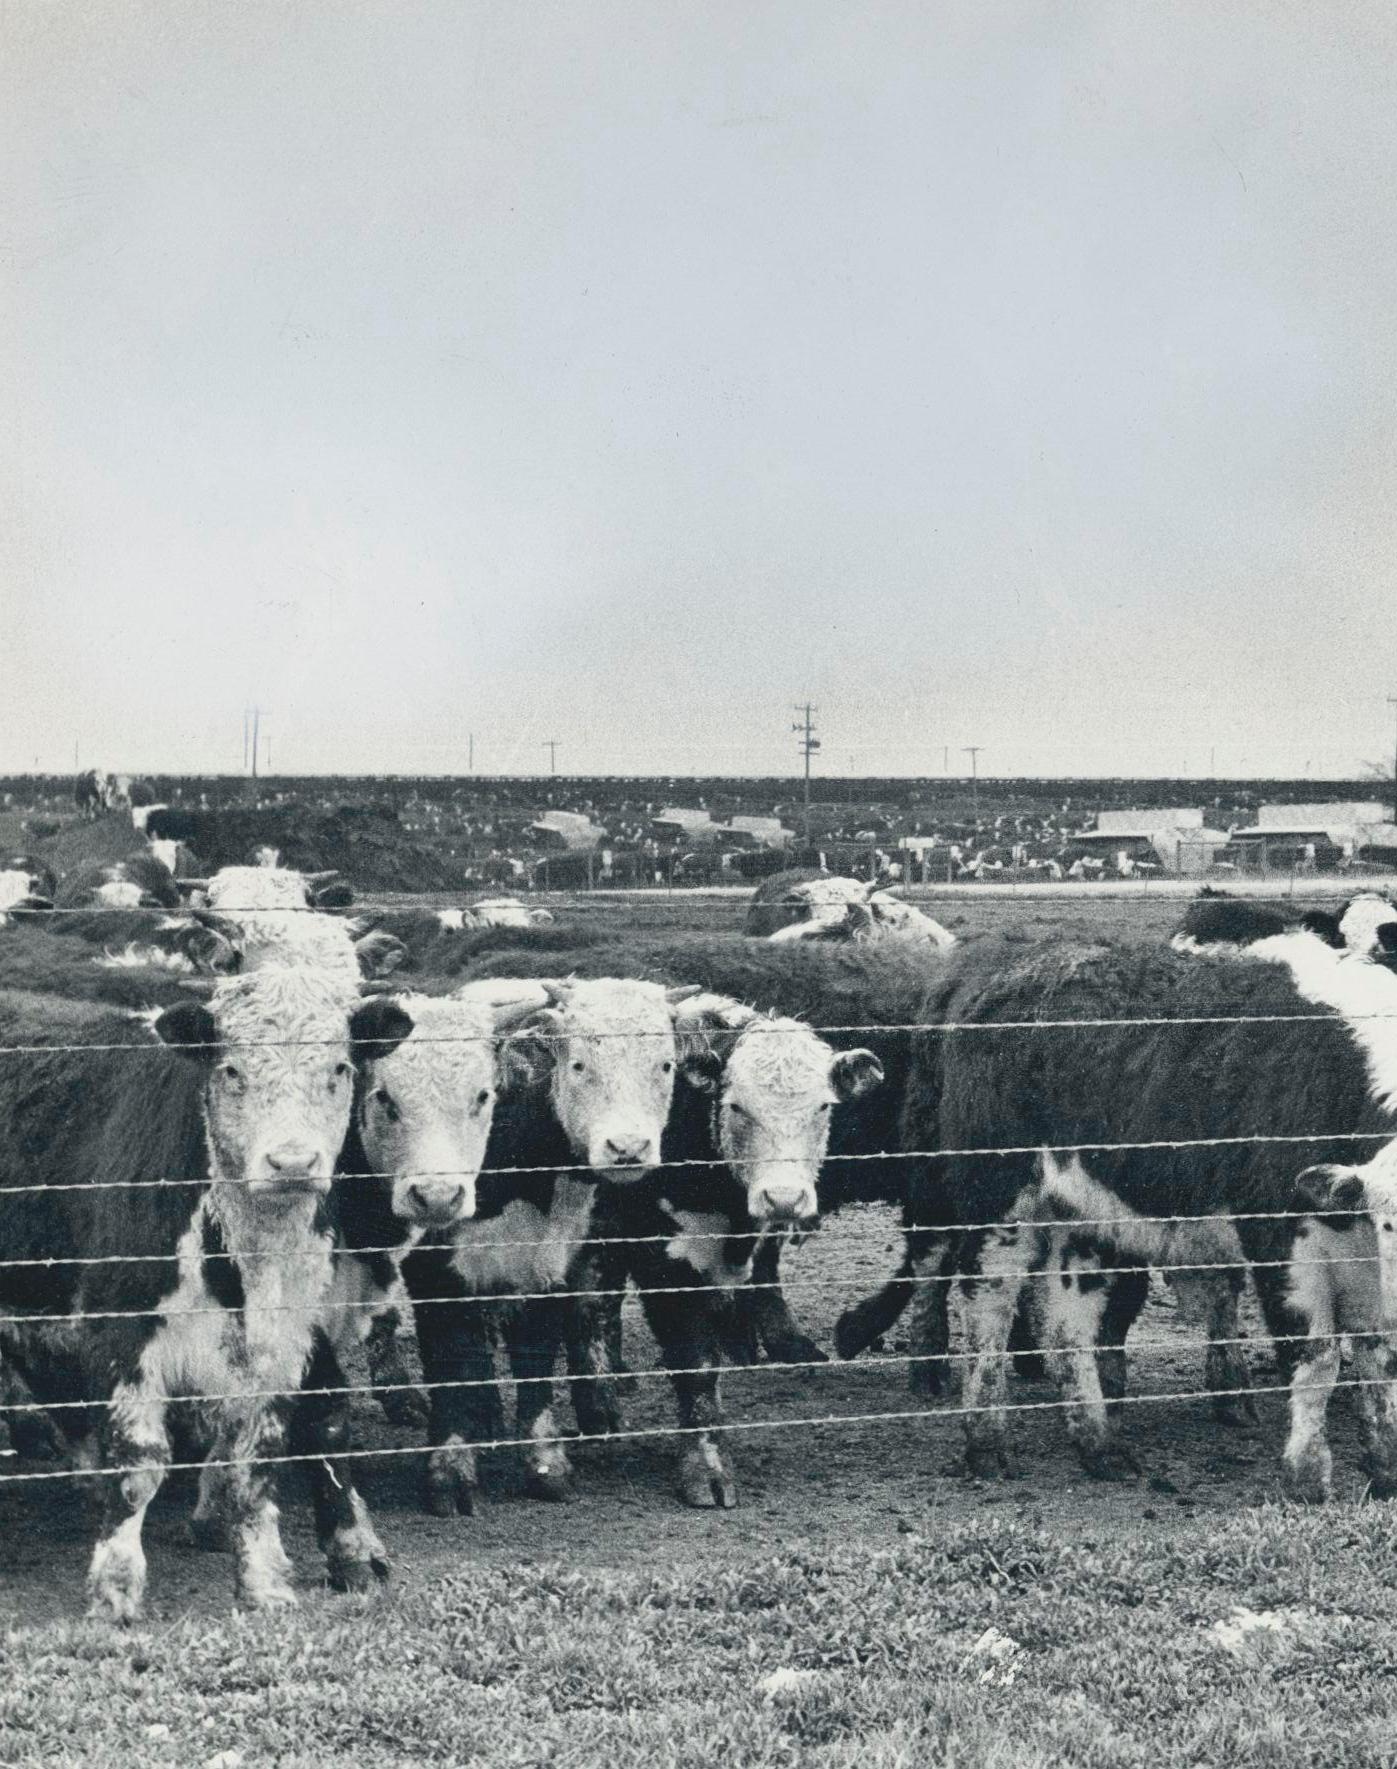 Cows, Black and White Photography, USA, Texas, 1960s, 16, 2 x 23, 2 cm For Sale 2